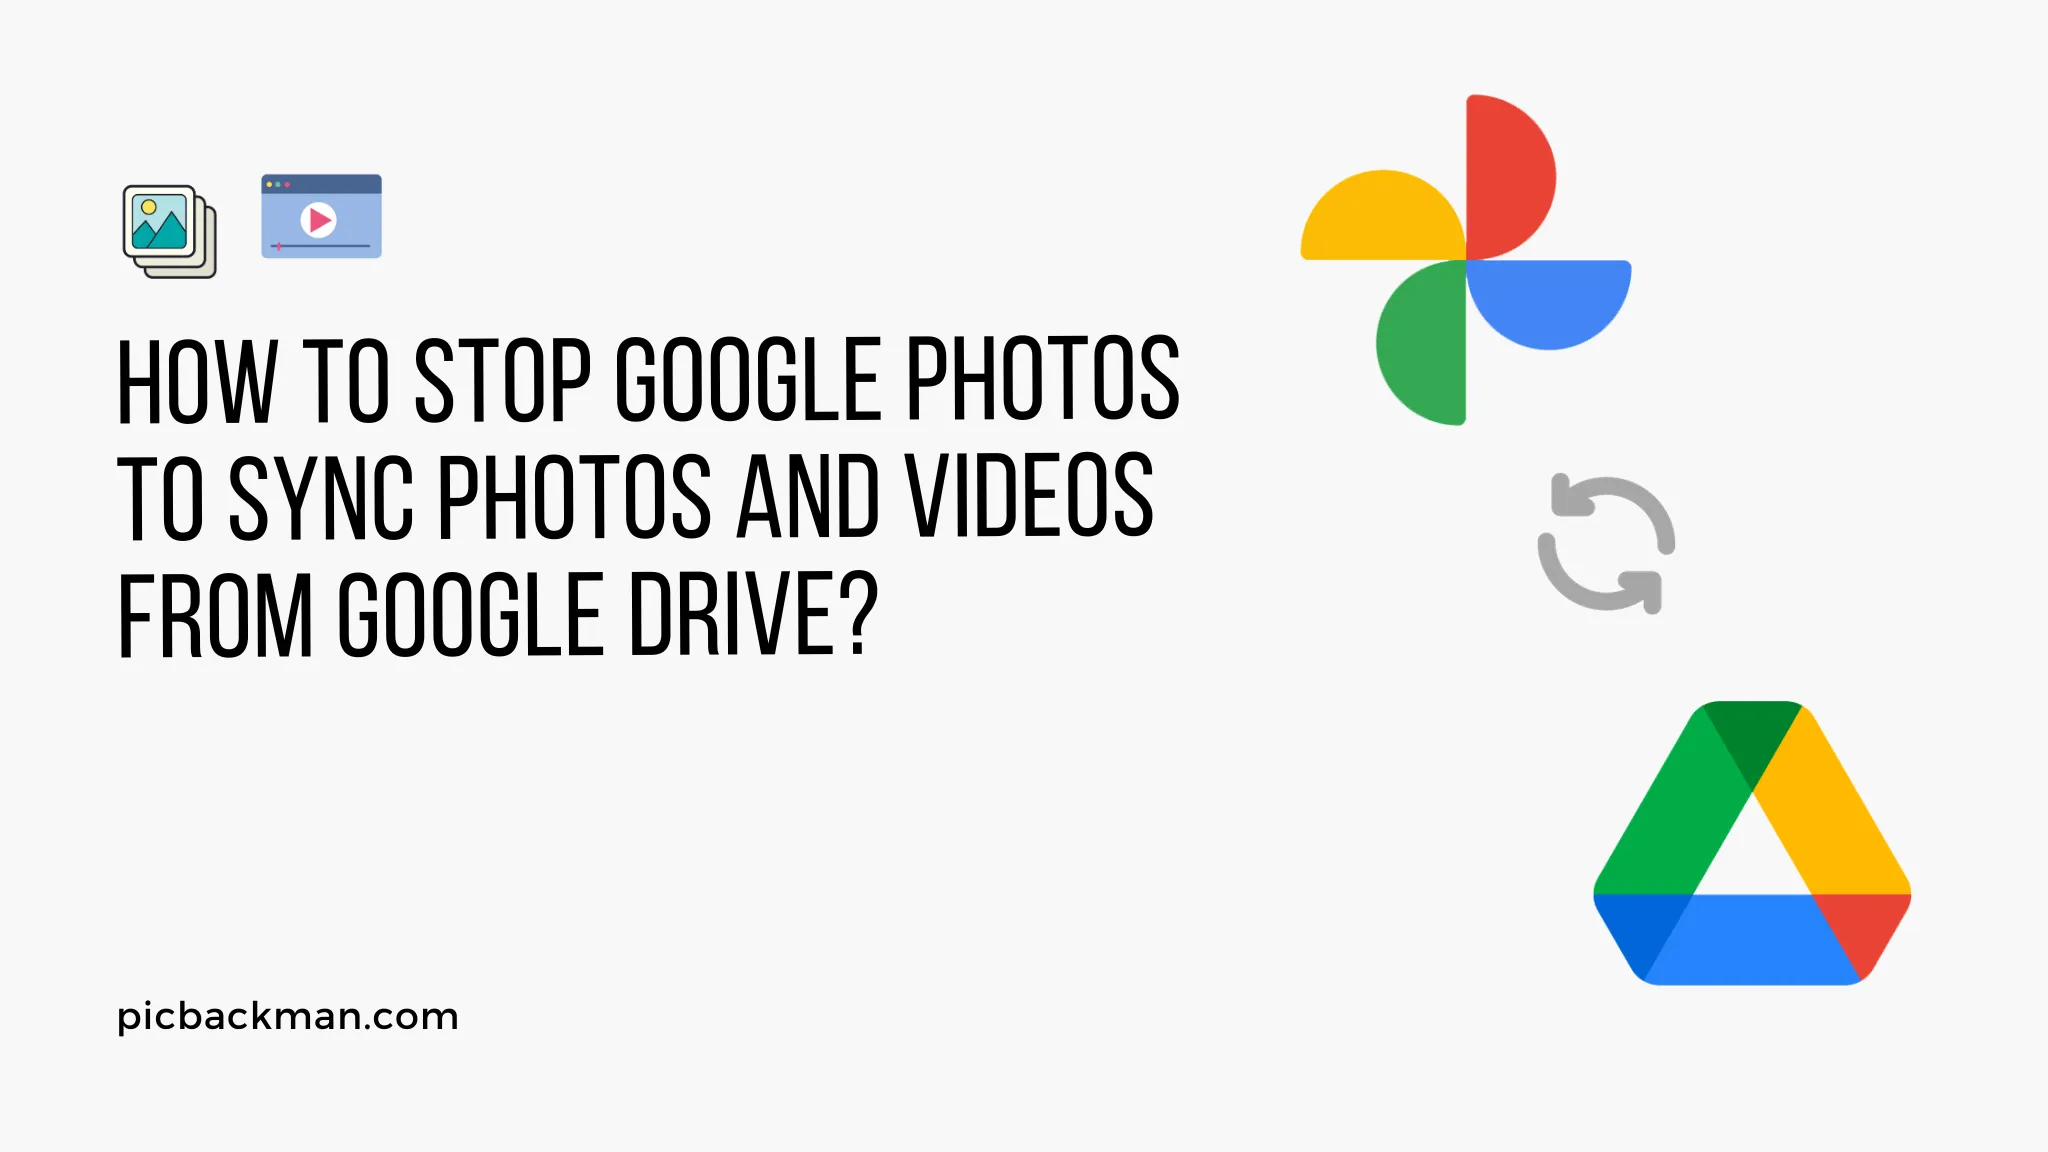 How to Stop Google Photos to Sync Photos and Videos from Google Drive?